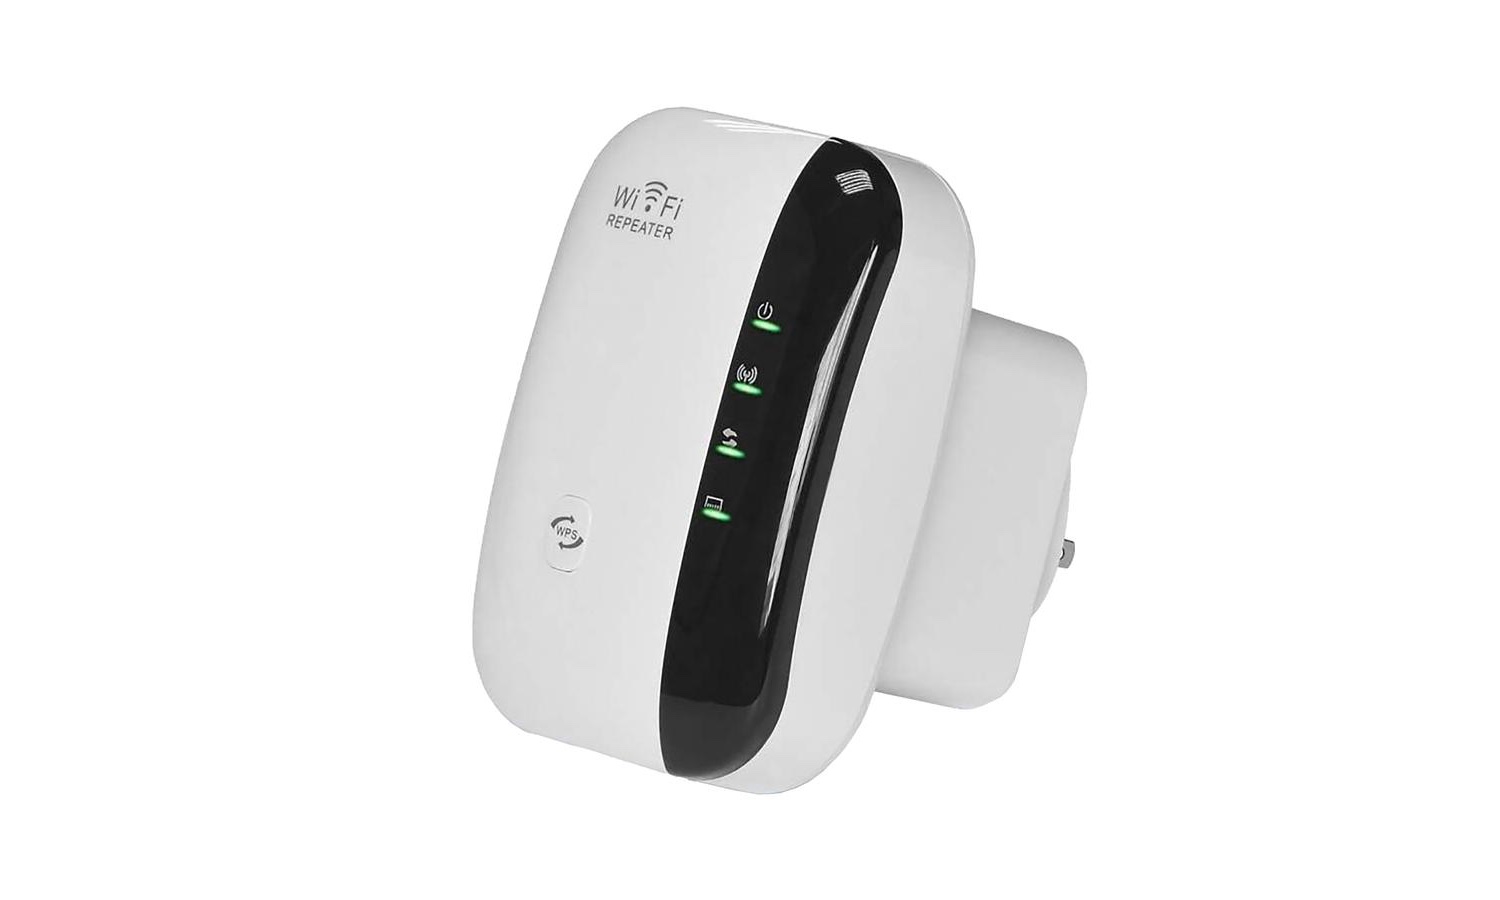 Does a Wireless Repeater Function?